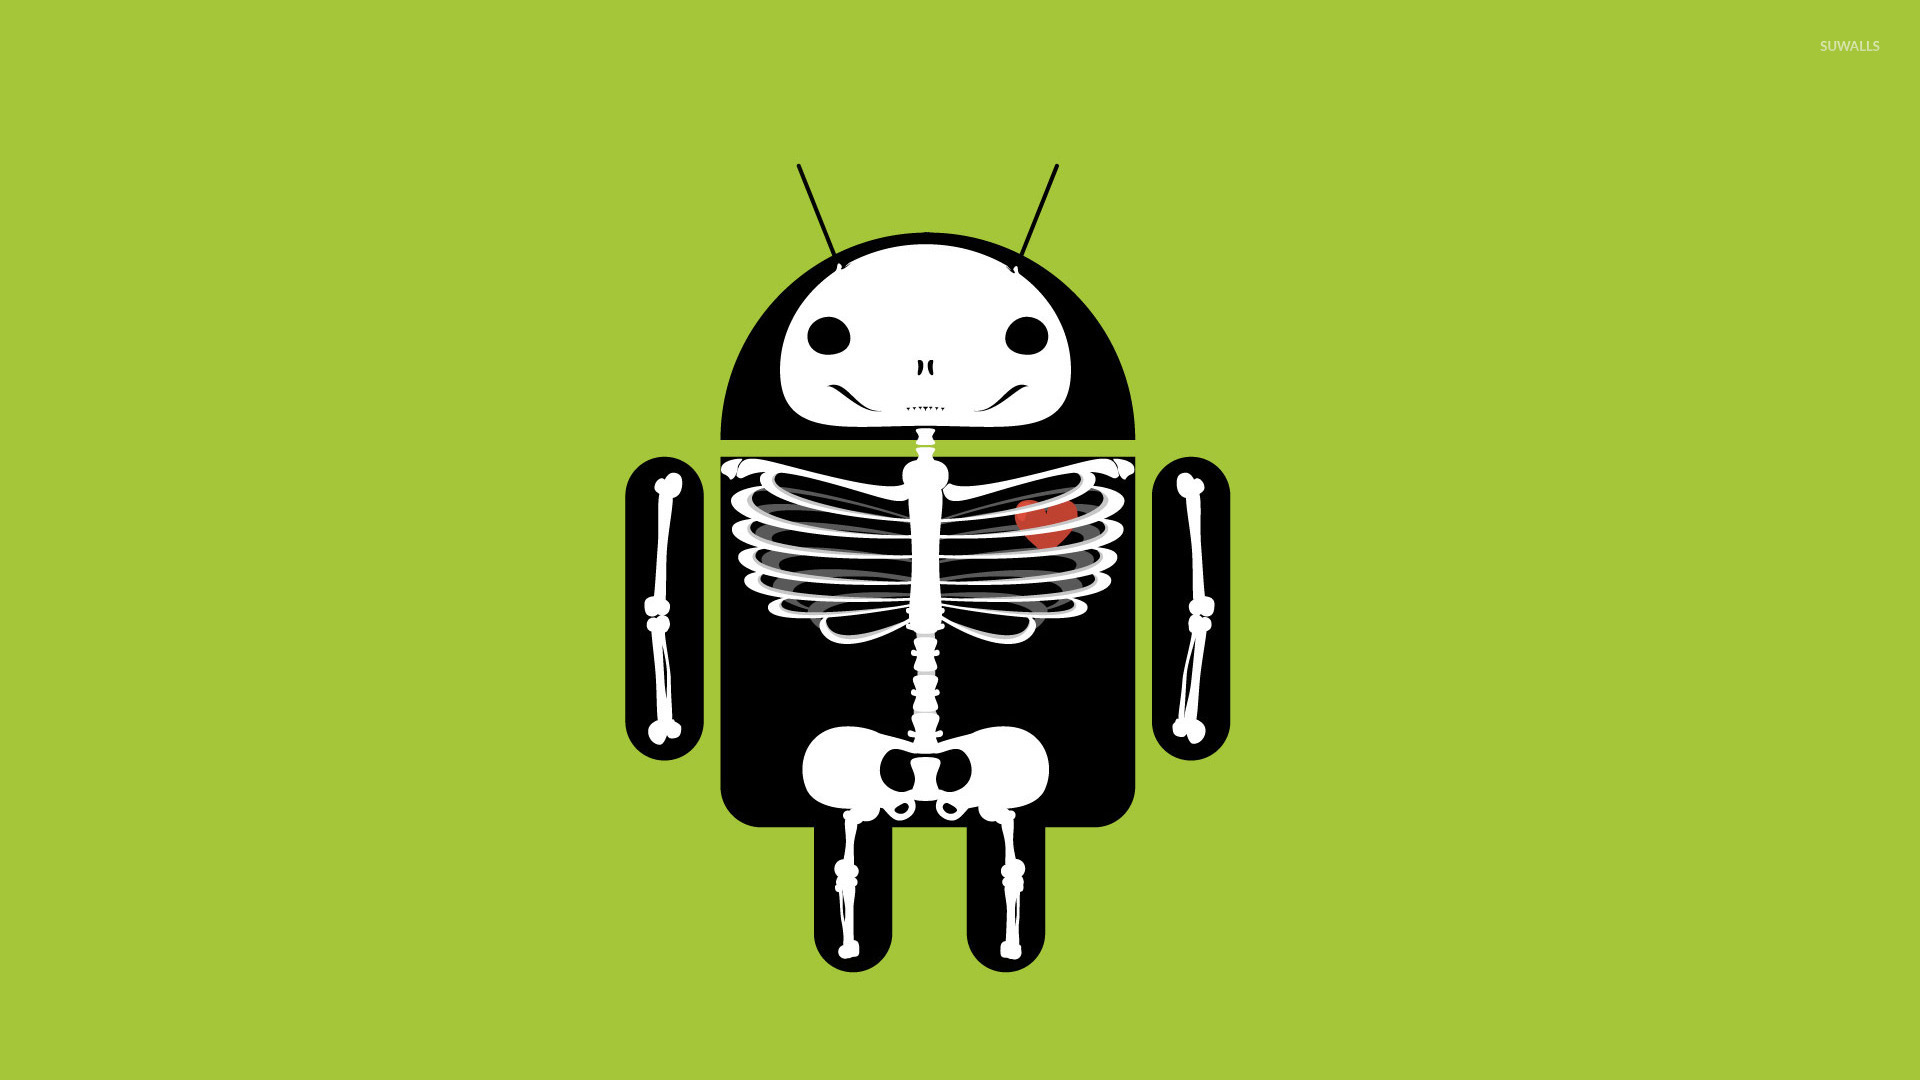 Android x ray wallpaper   Computer wallpapers   19344